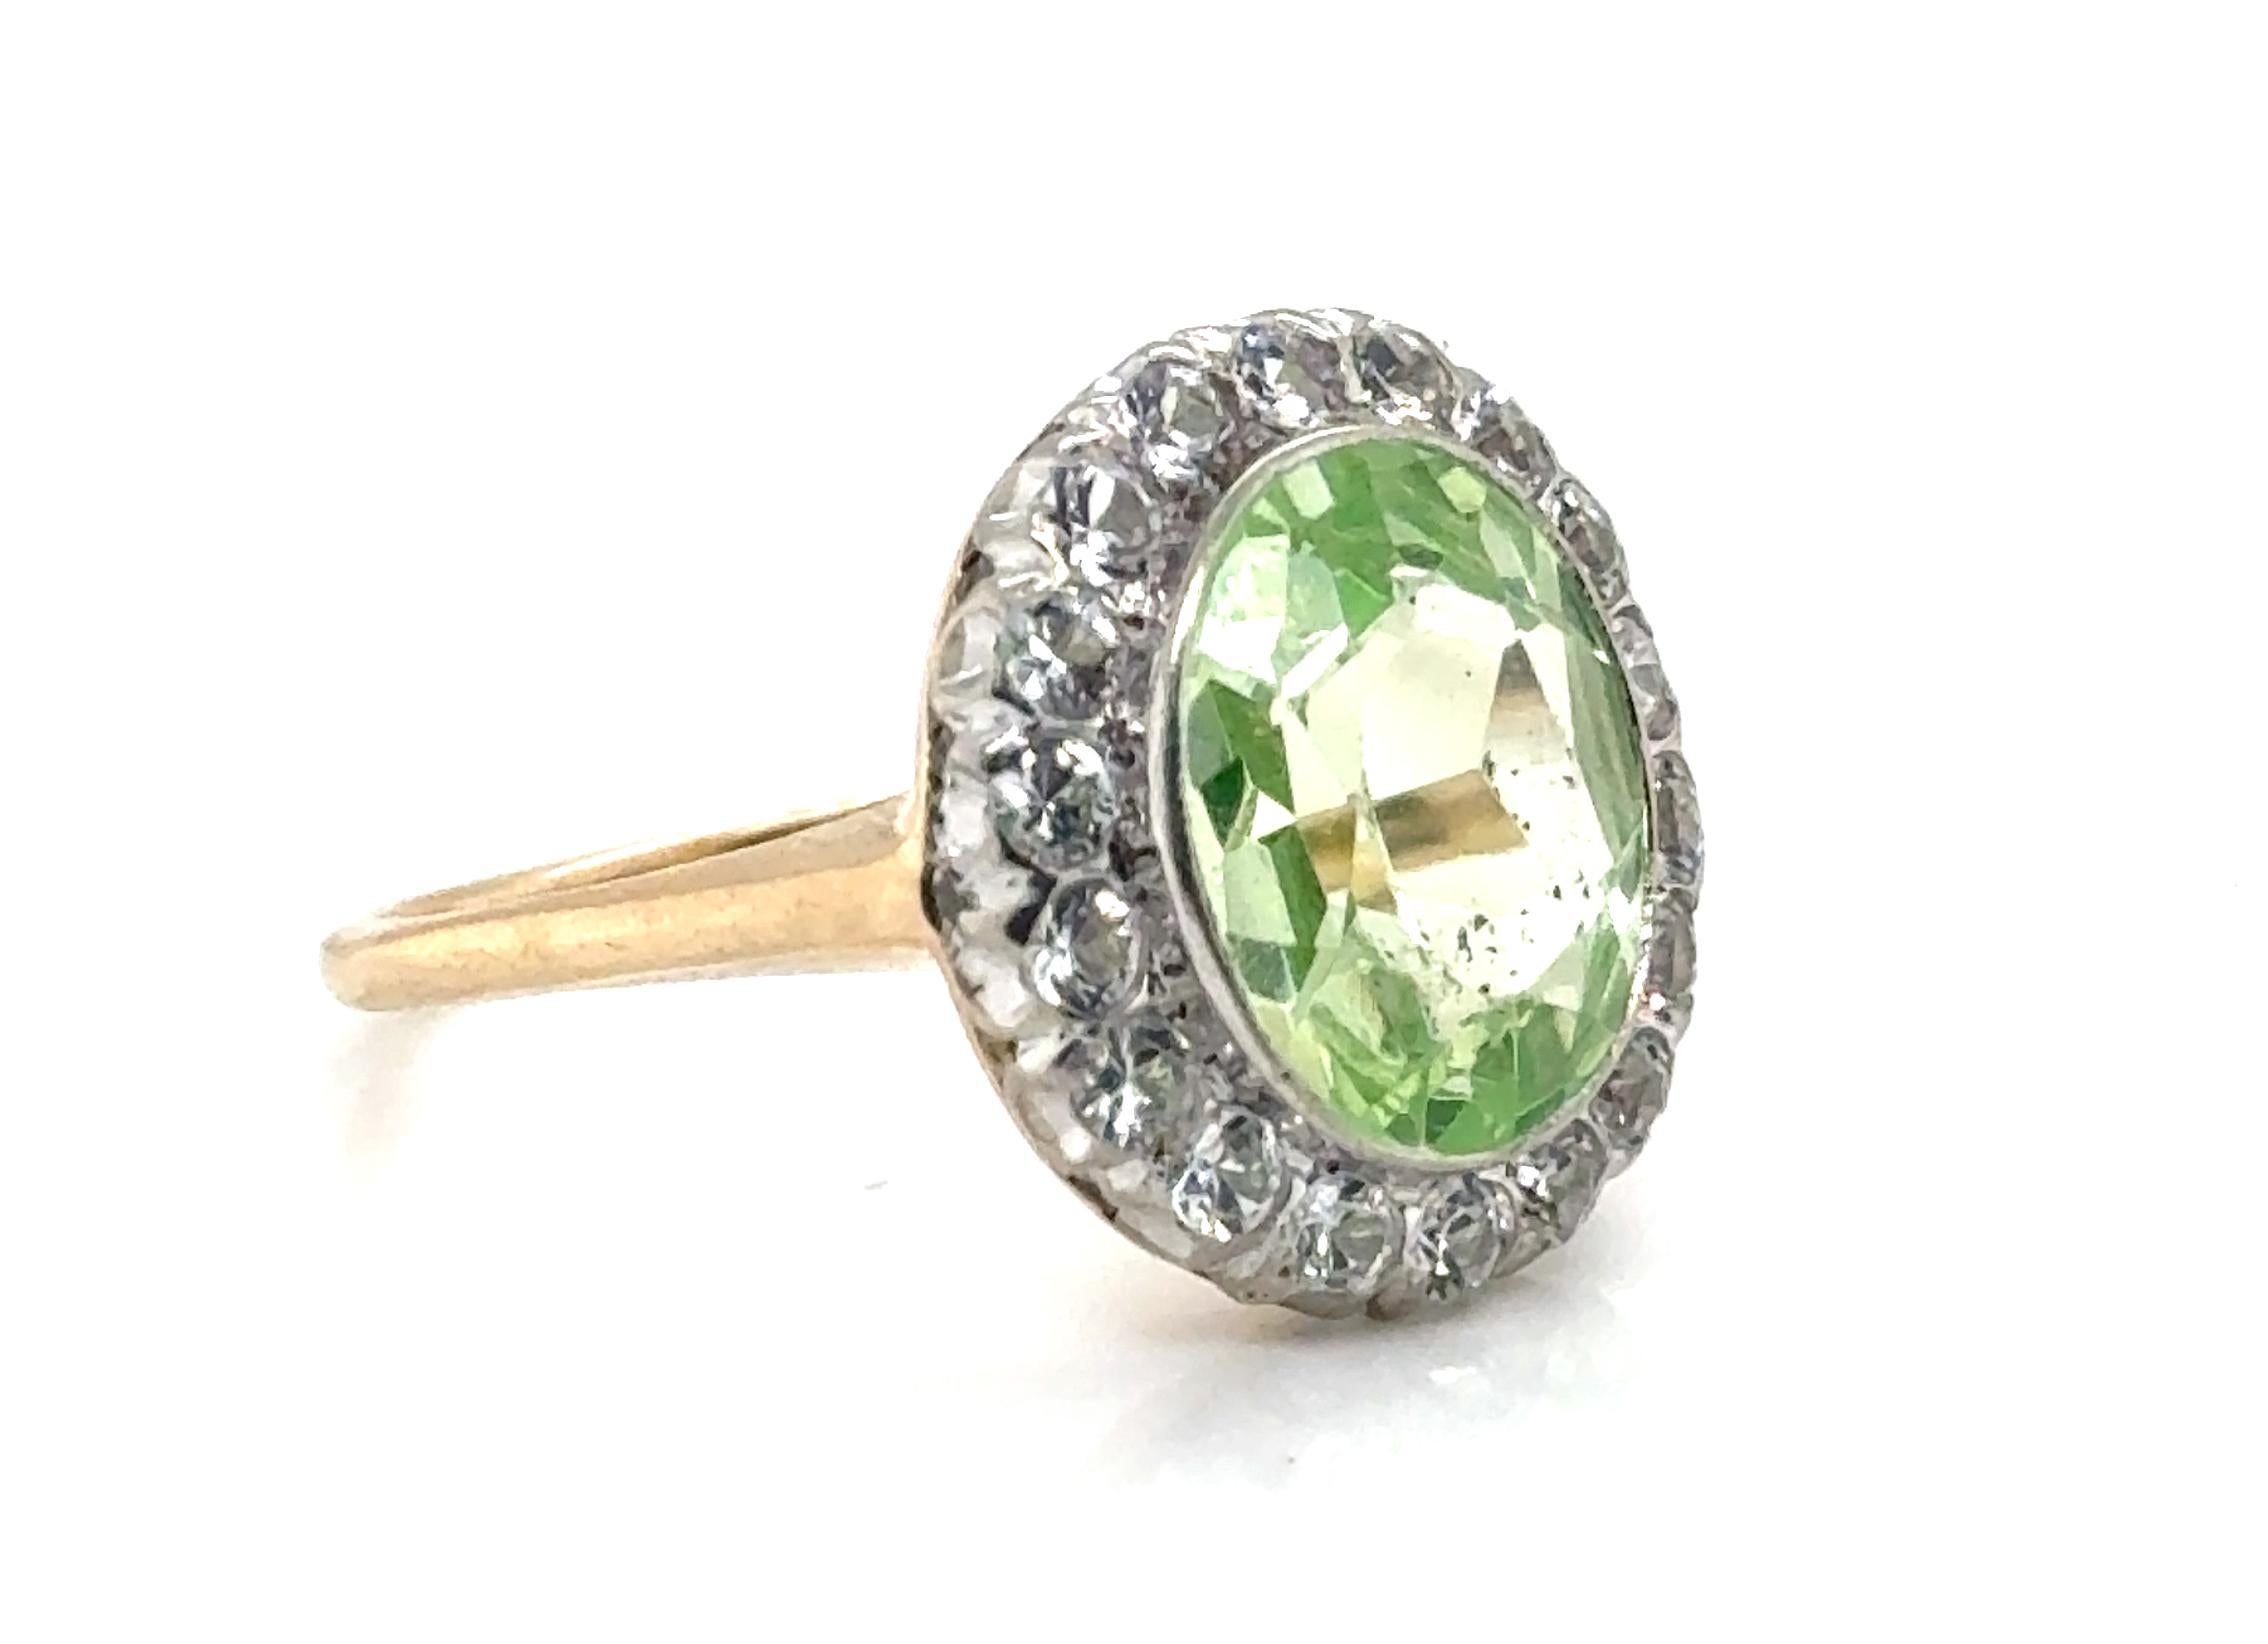 Genuine Original Antique from the 1930-1940 Art Deco Peridot White Sapphire Cocktail Halo Ring Gold


Featuring a BIG 12 x 10mm Peridot Gemstone Center

Surrounded by a Halo of Old Cut White Sapphires

Peridot is the August Birthstone

100% Natural